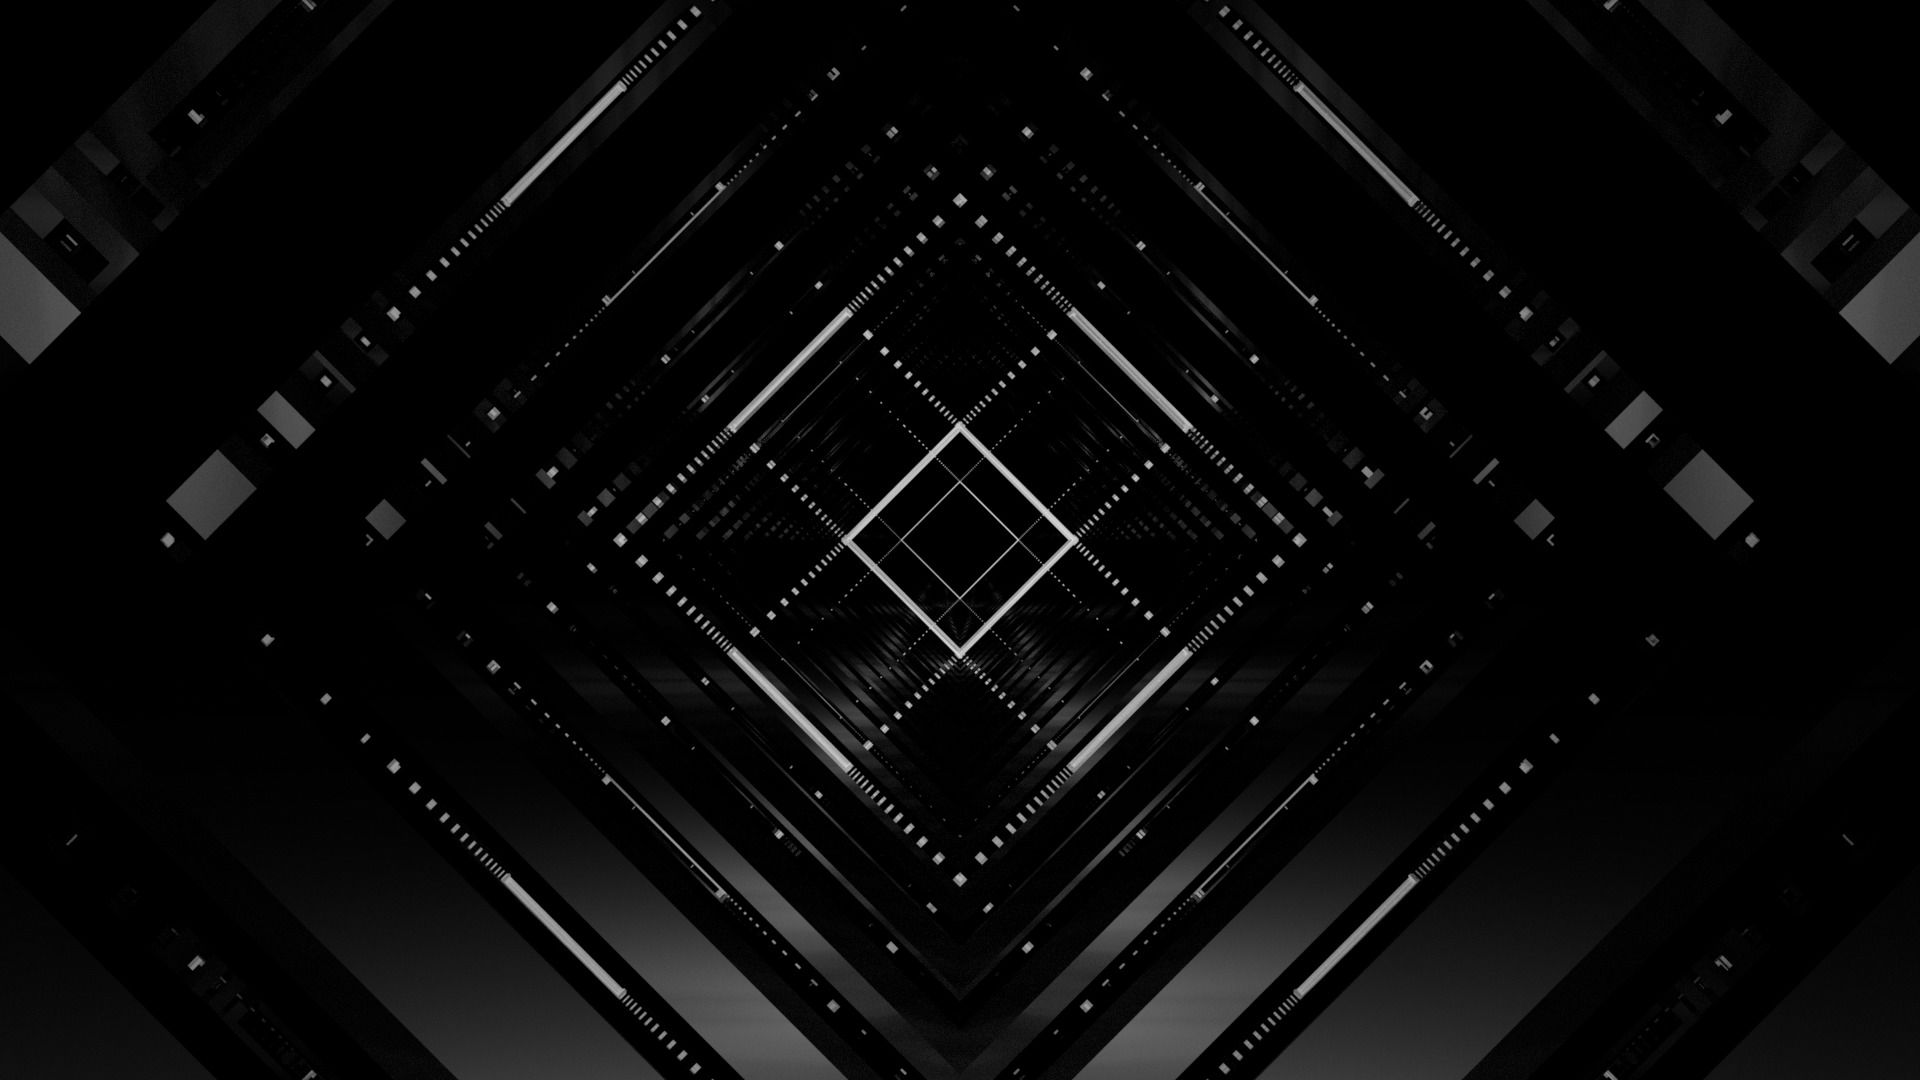 Inverted Black Square Vector Art Wallpapers